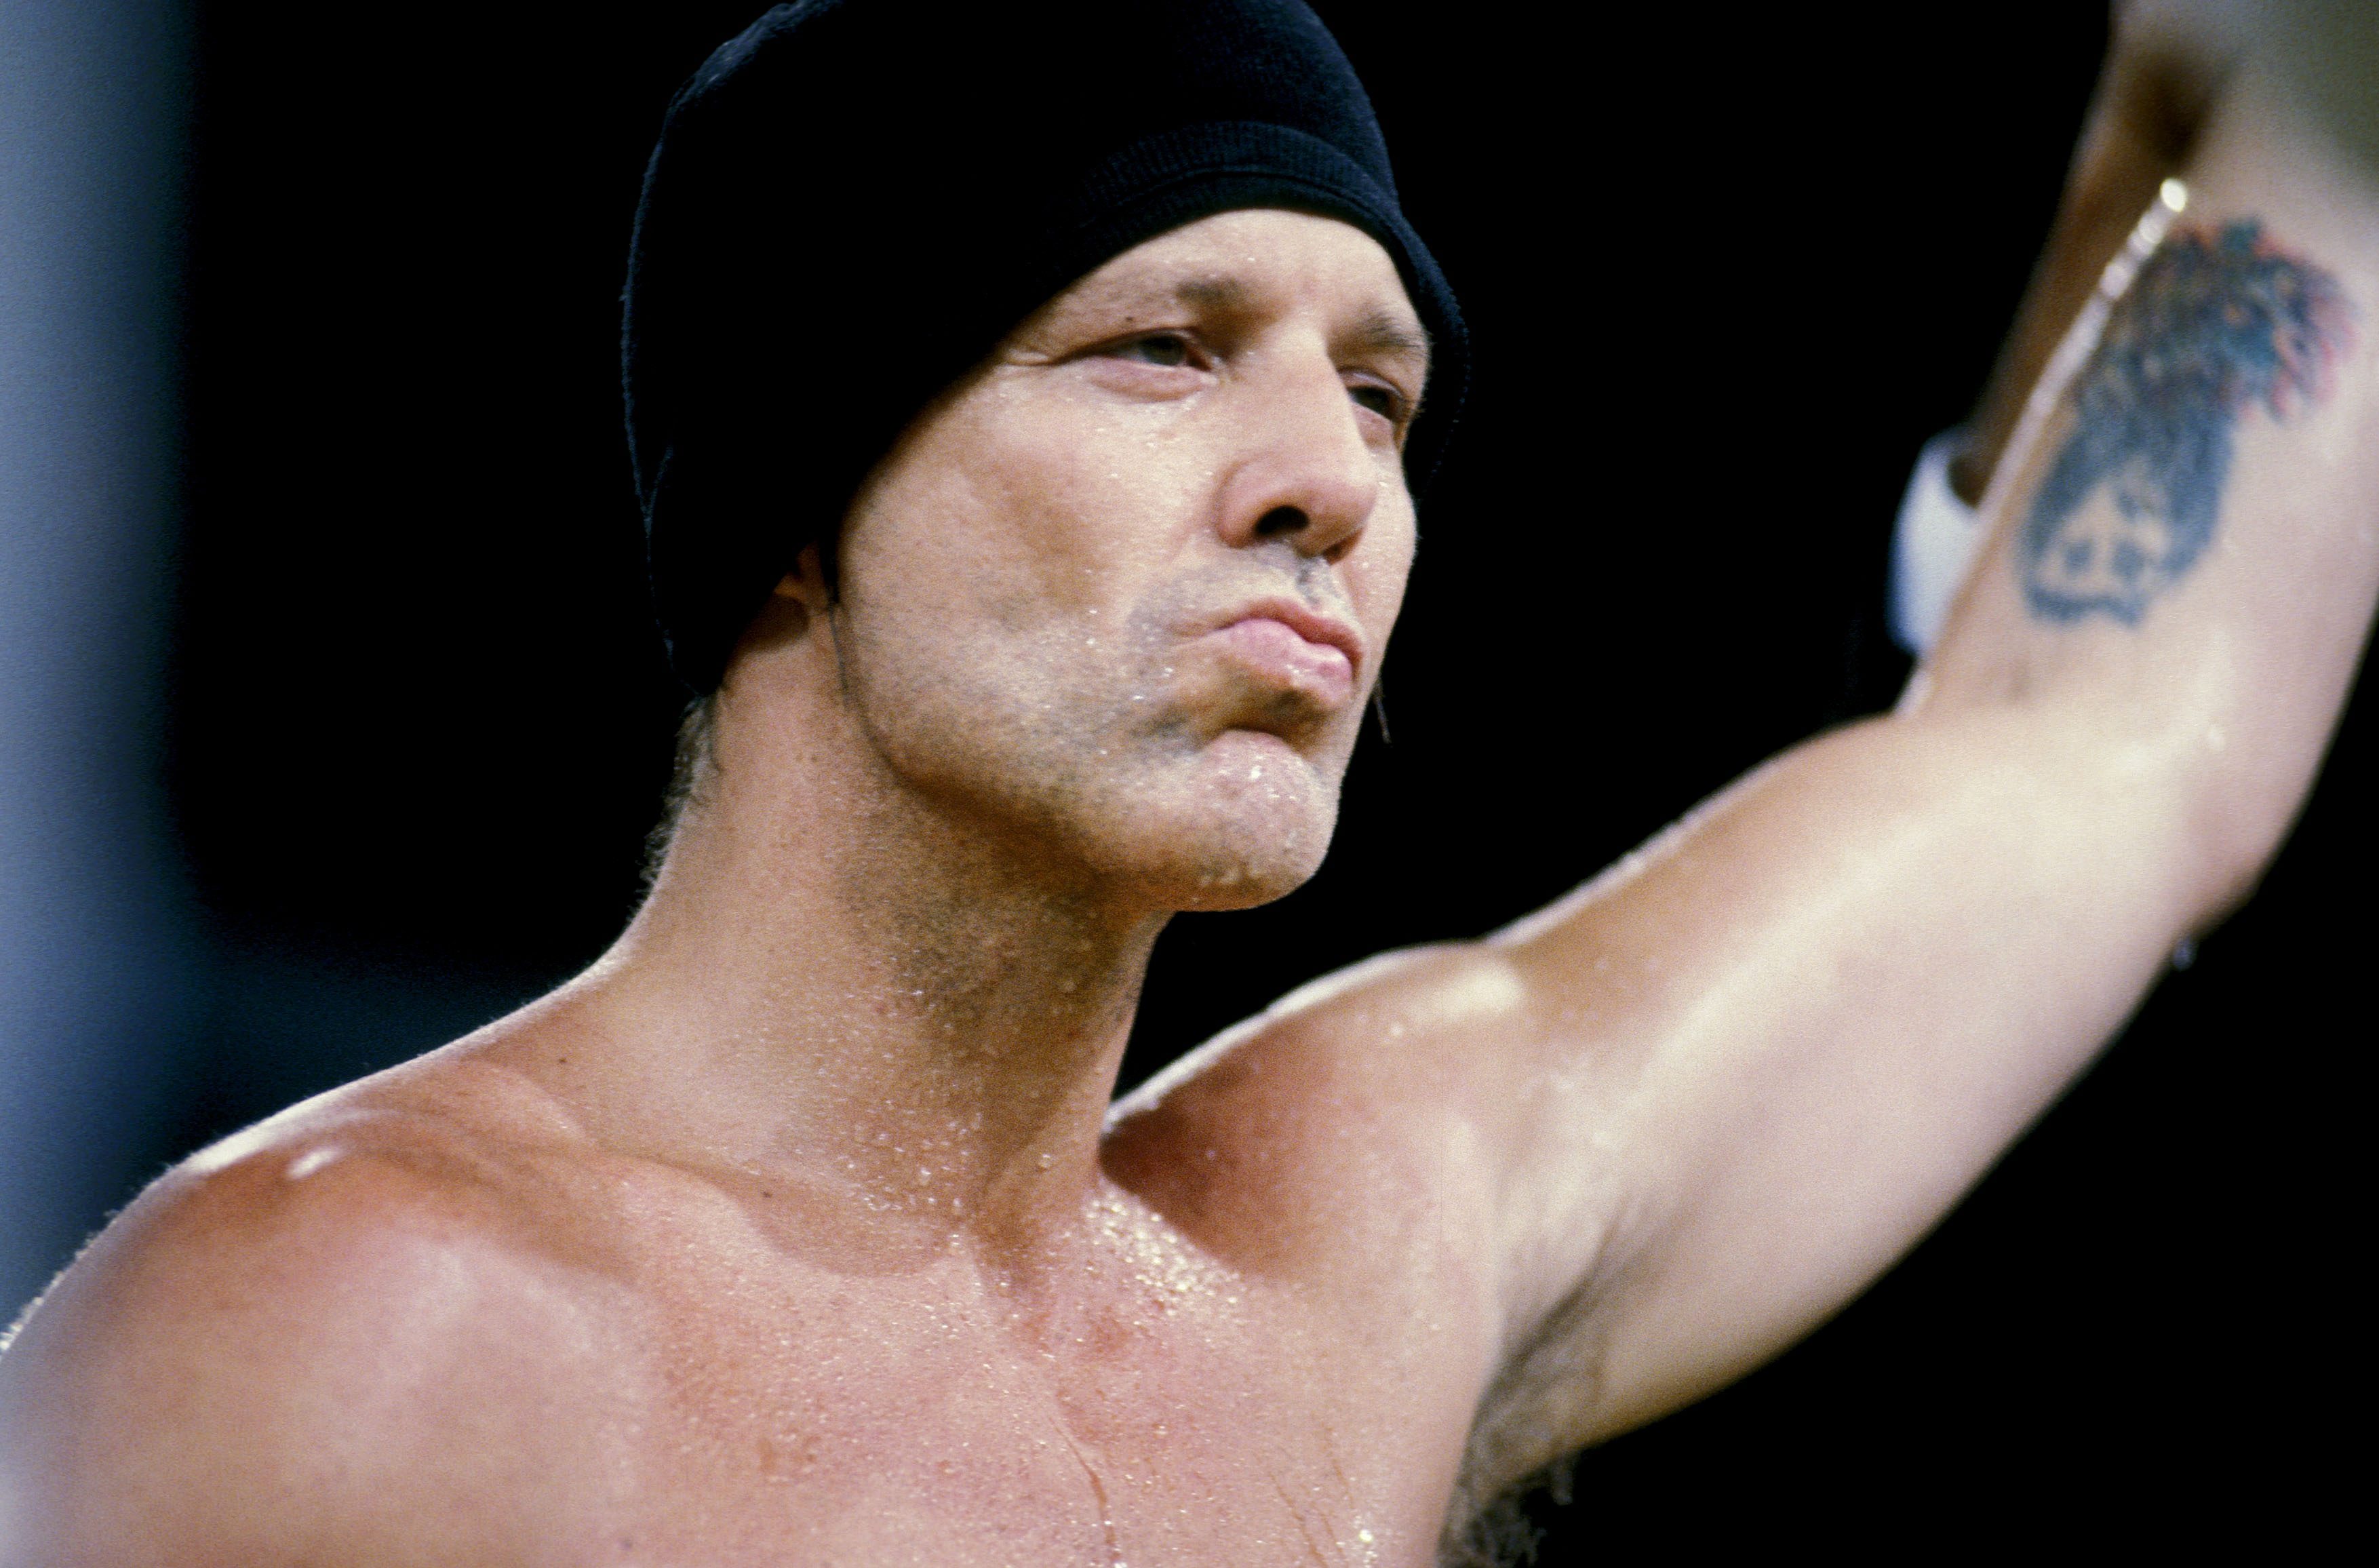 Mickey Rourke at a boxing exhibition on August 1, 1993 in Buenos Aires, Argentina. | Source: Getty Images